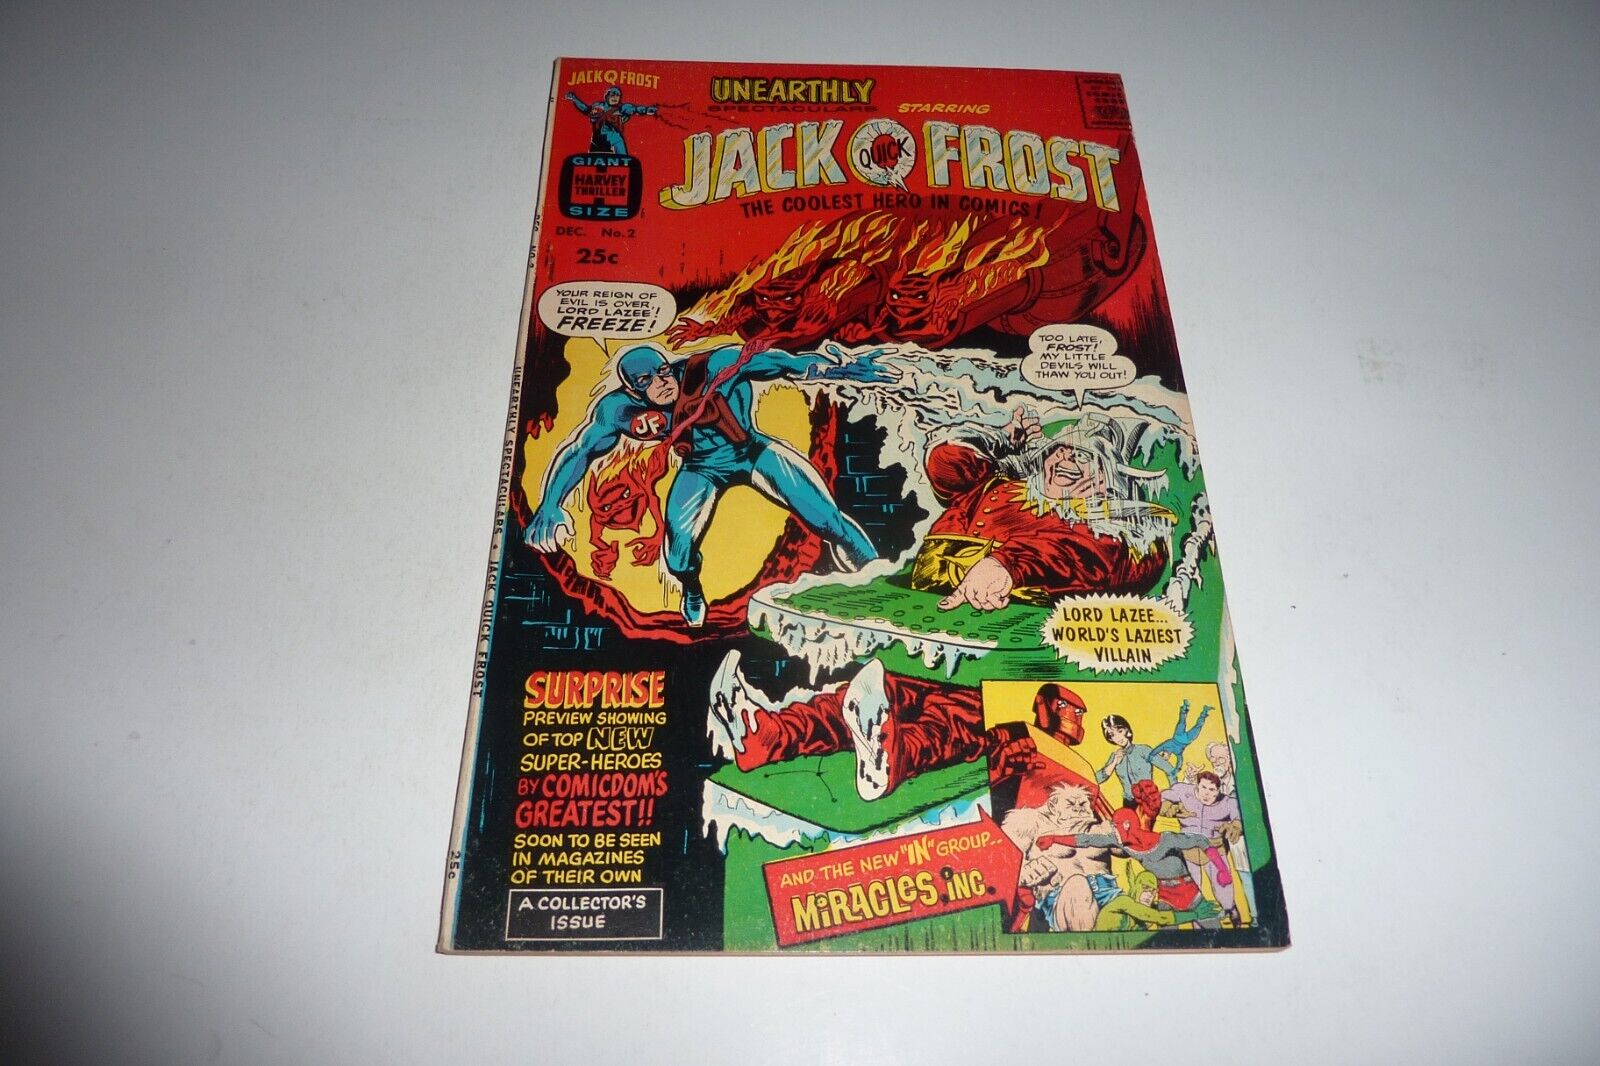 UNEARTHLY SPECTACULARS Jack Q. Frost #1 Harvey Comics 1966 VF- 7.5 Nice Copy